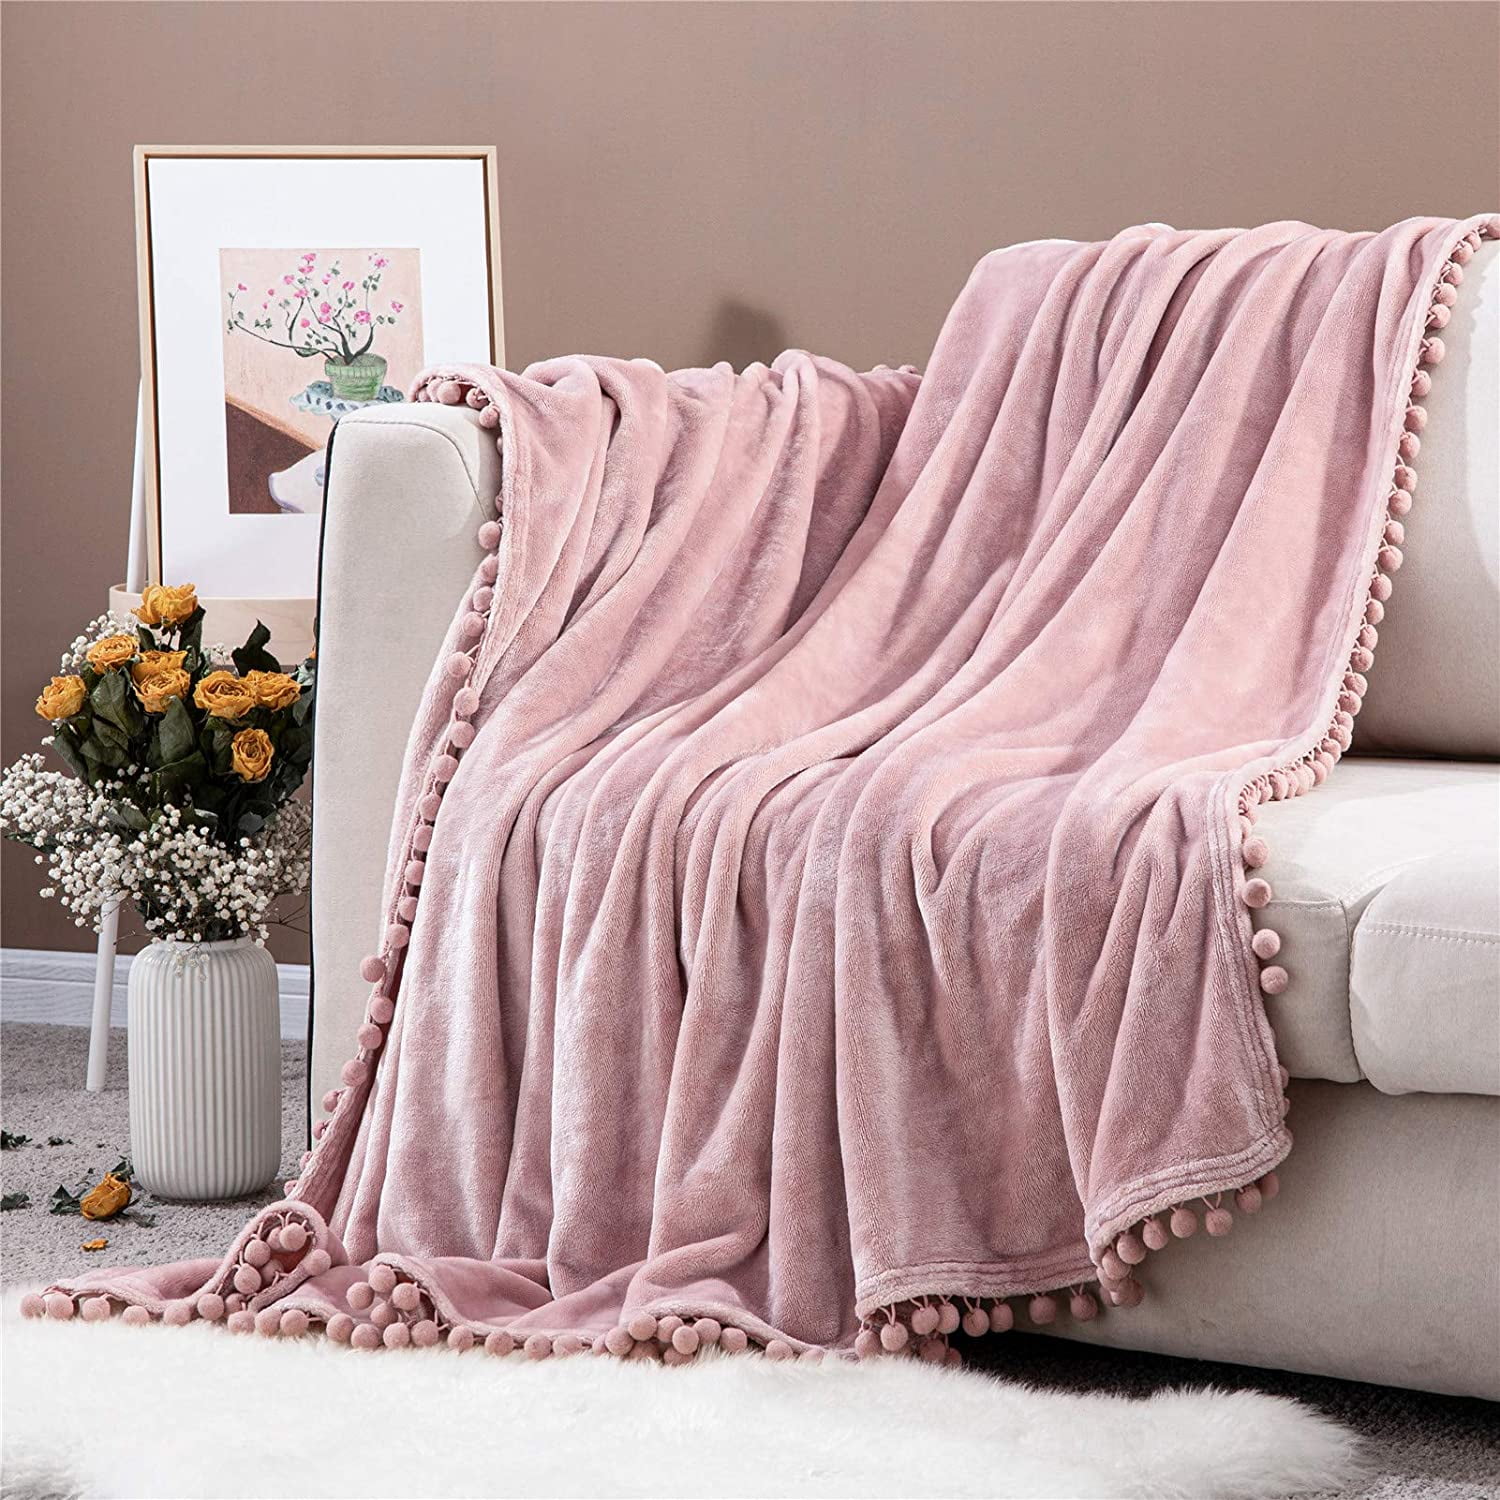 Warm Fuzzy Plush Throw 50x 80 Pink Flowers Romantic Pattern Lightweight Flannel Blankets for Couch Bed Living Room Sweet Home Fleece Throw Blanket Full Size 